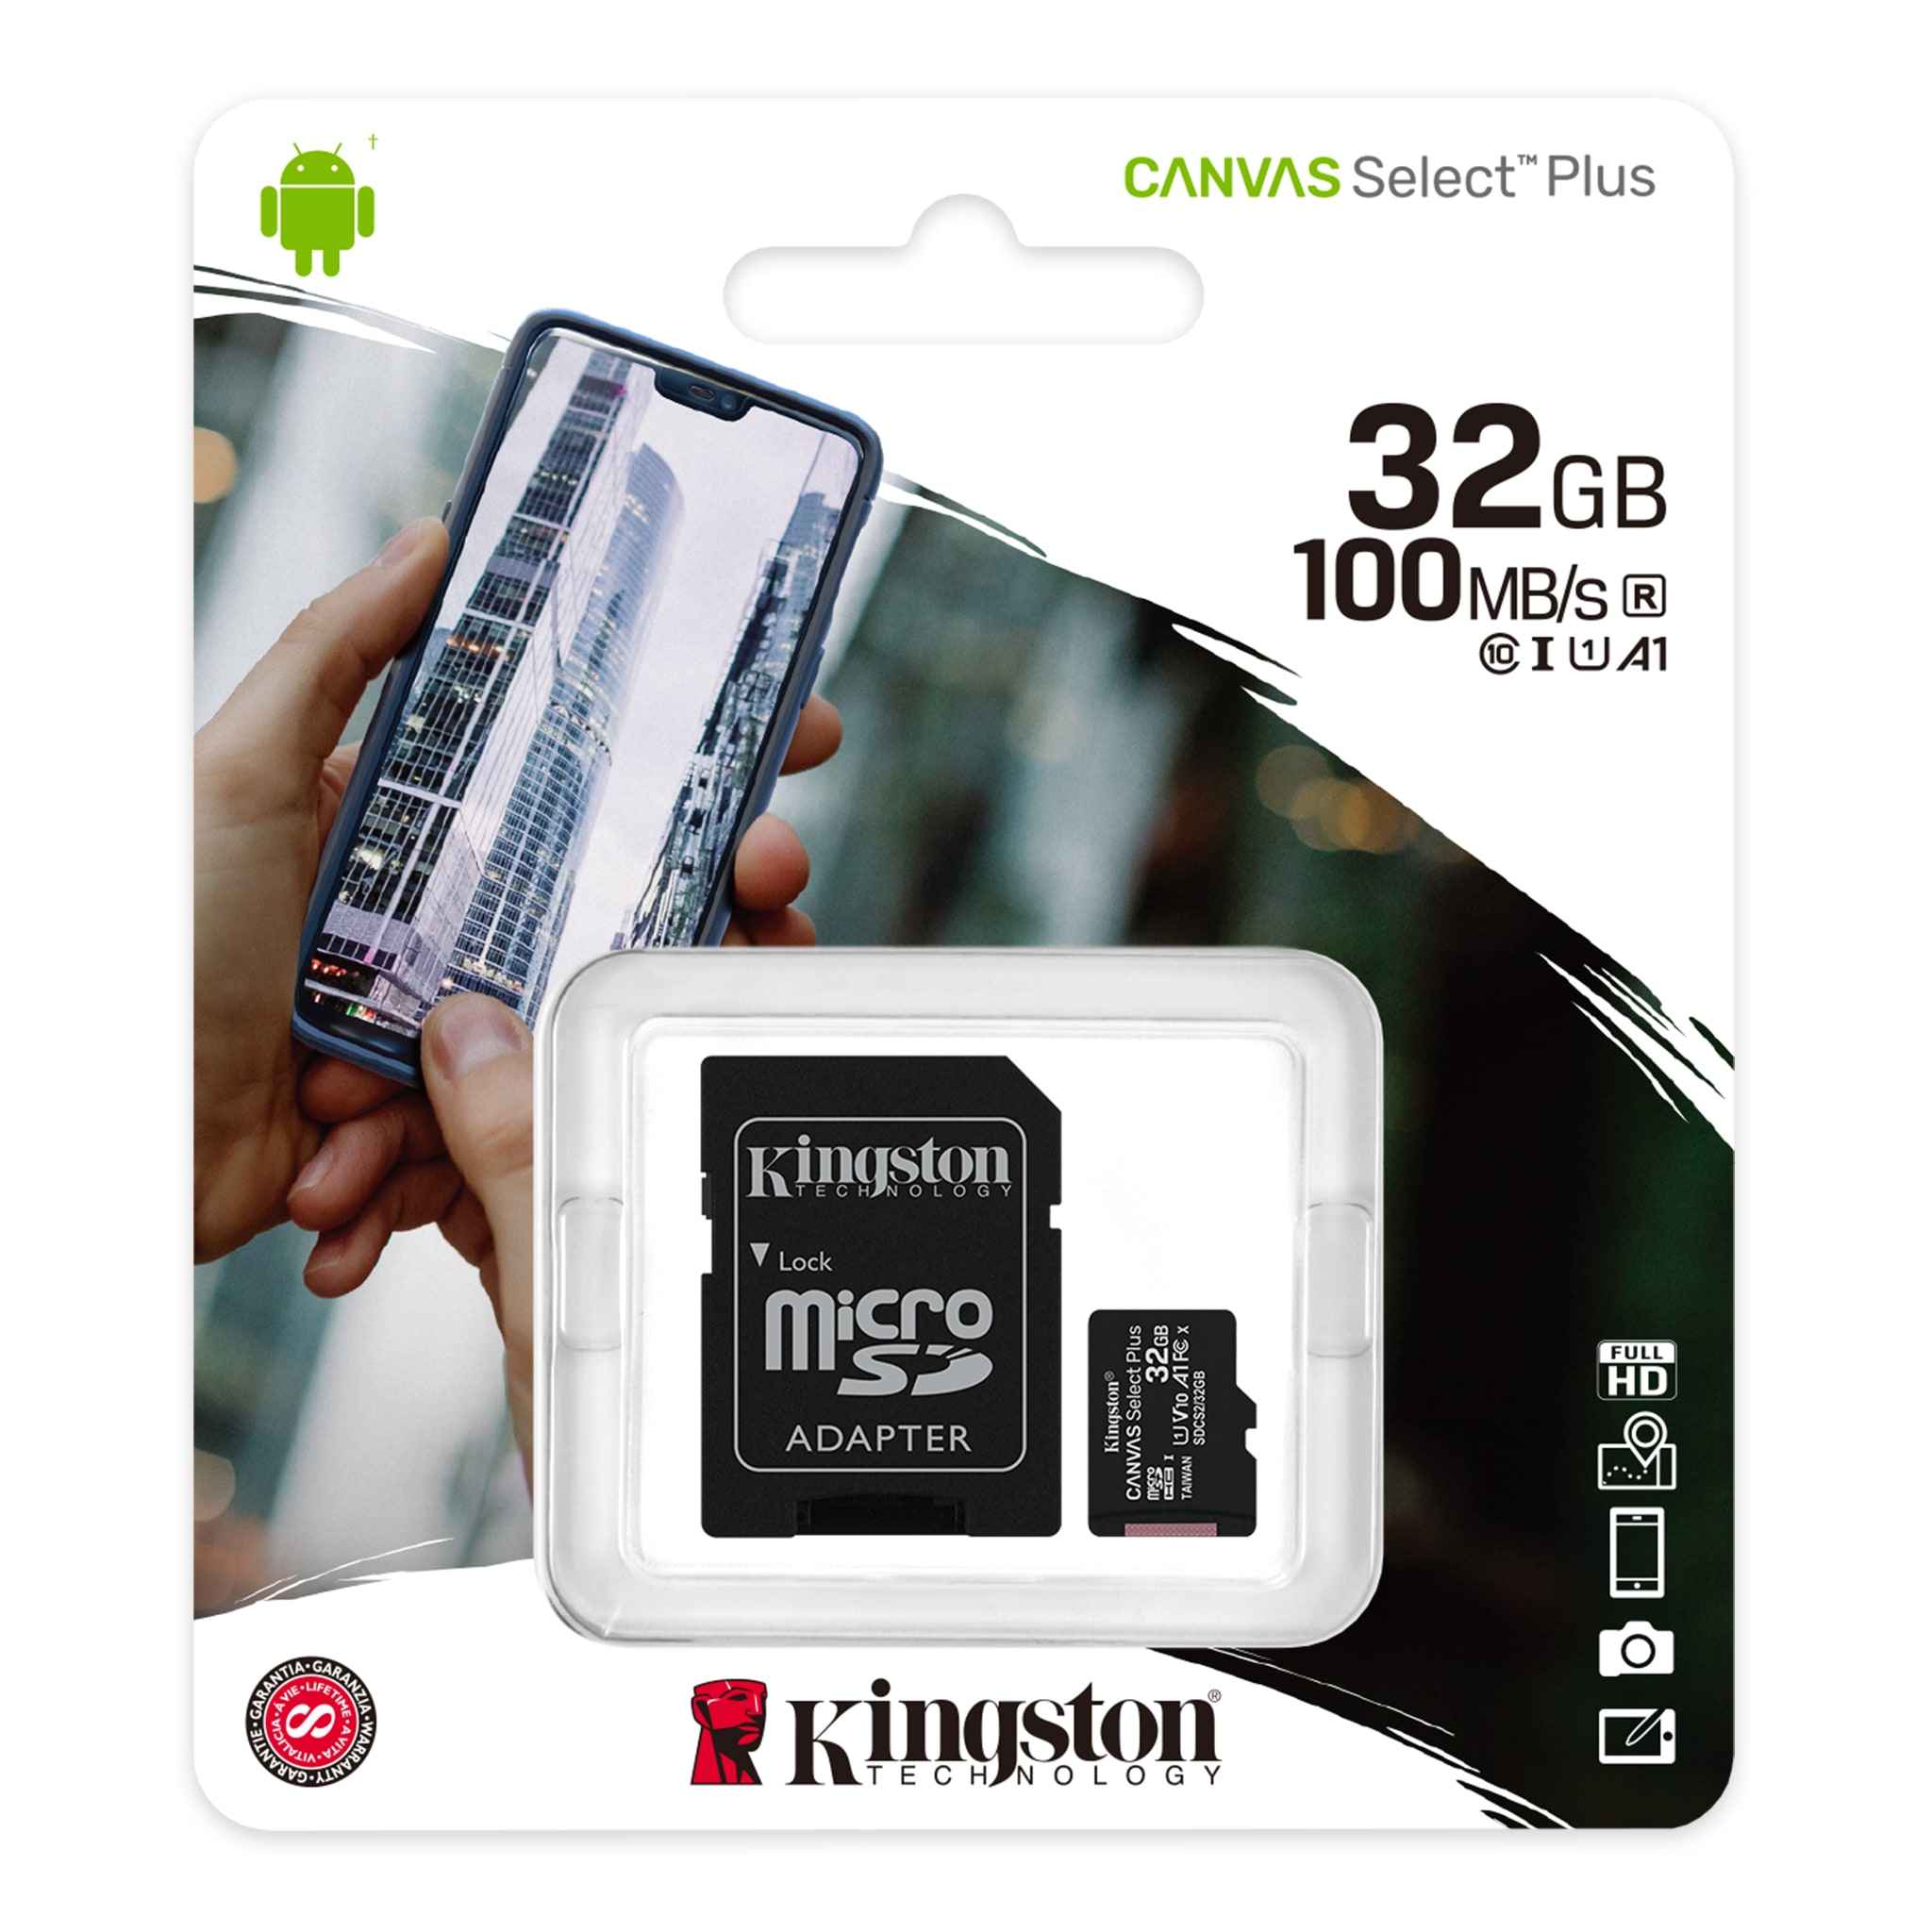 32GB Canvas Select Plus microSD Card For Sale in Trinidad